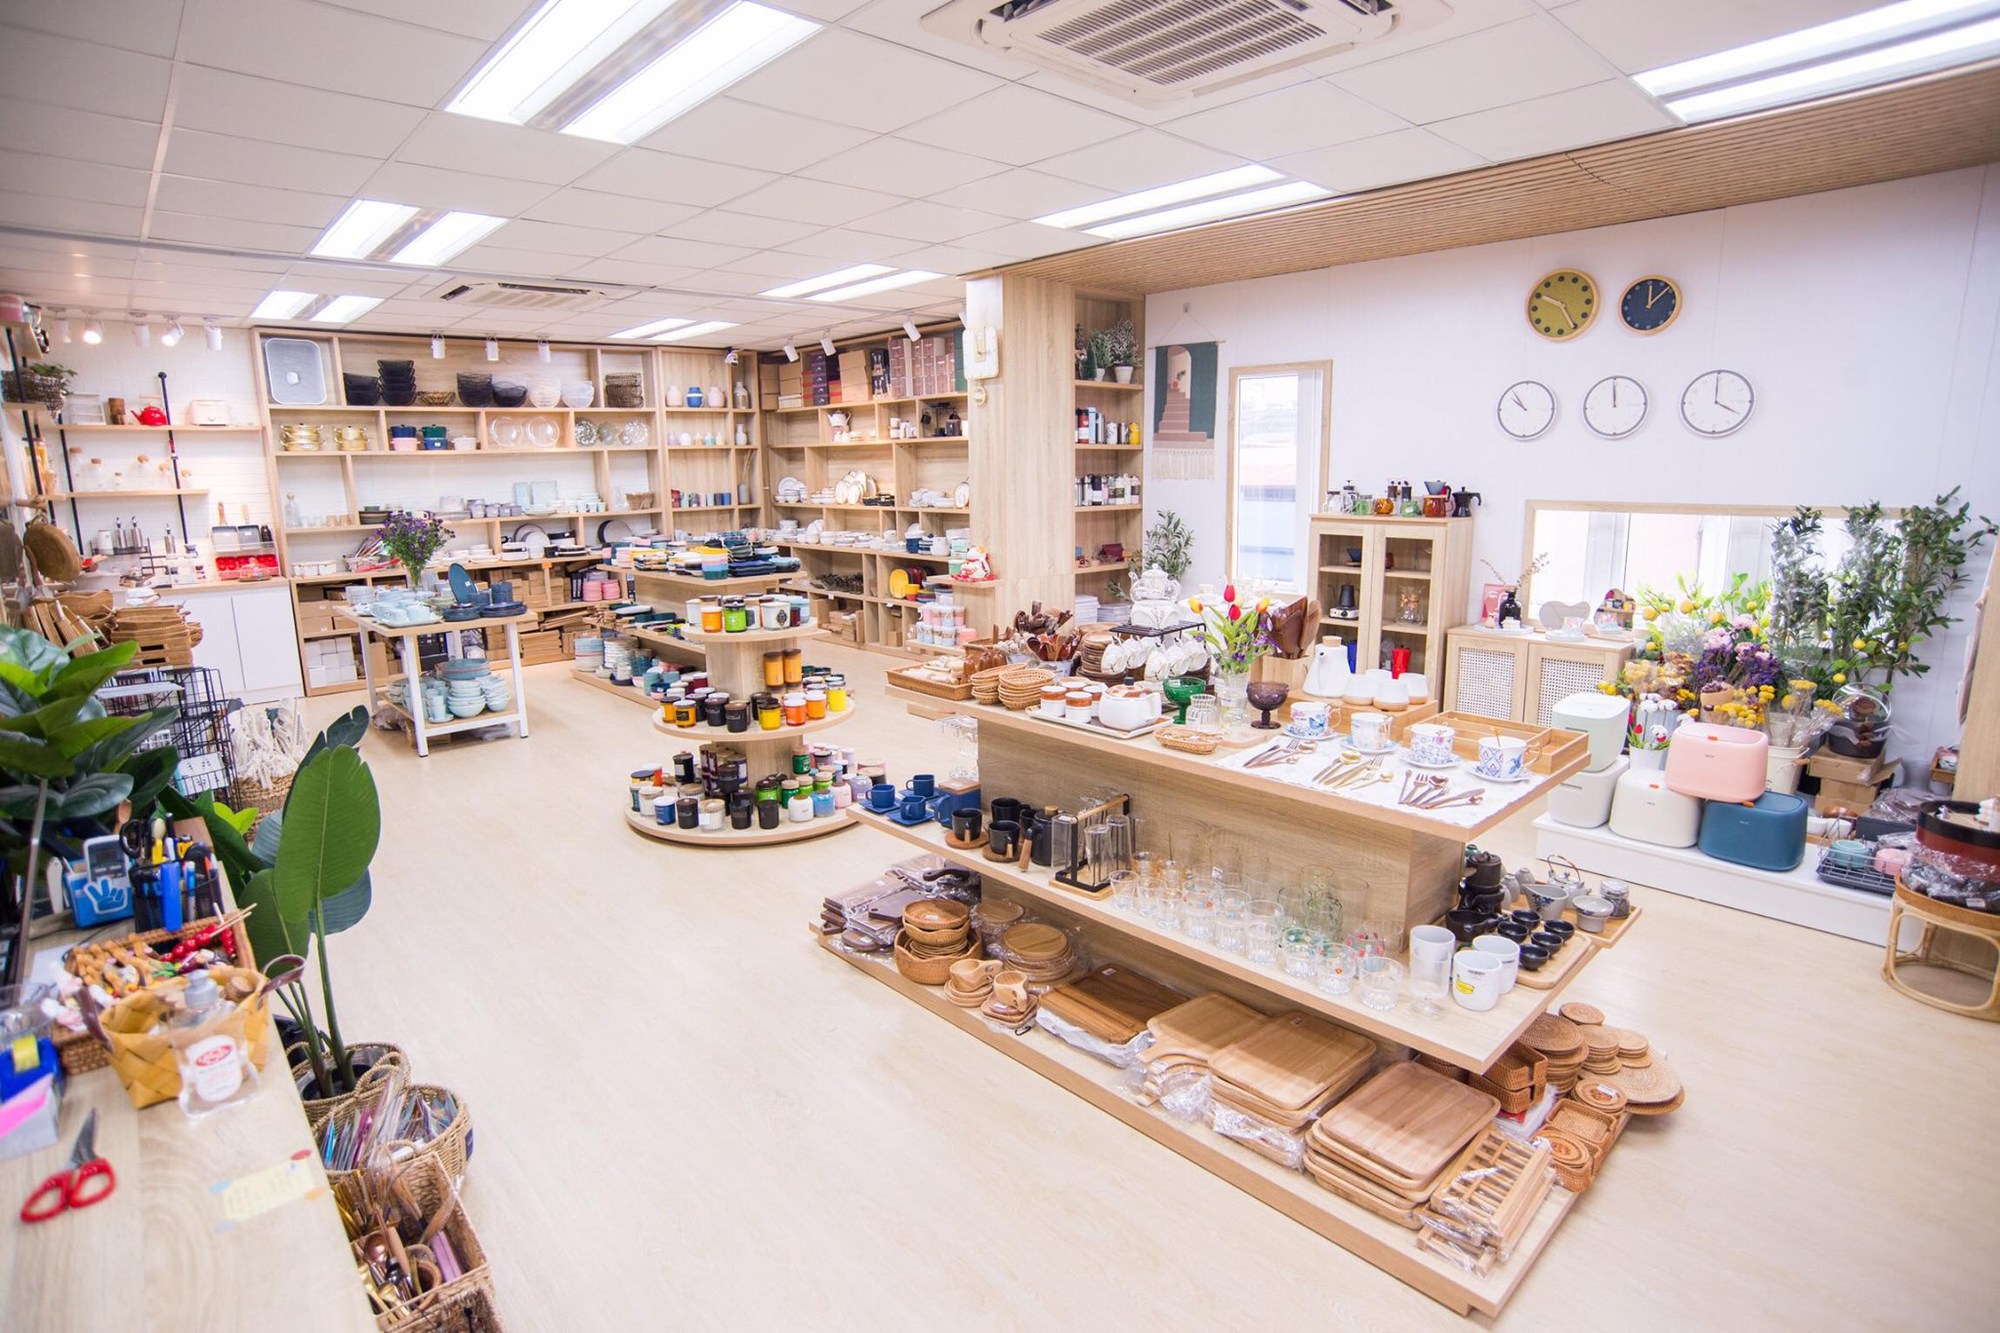 Take a tour of Hanoi to discover 4 shops selling decor: From traditional bamboo and rattan patterns to high-quality ceramics, there are enough - Photo 6.